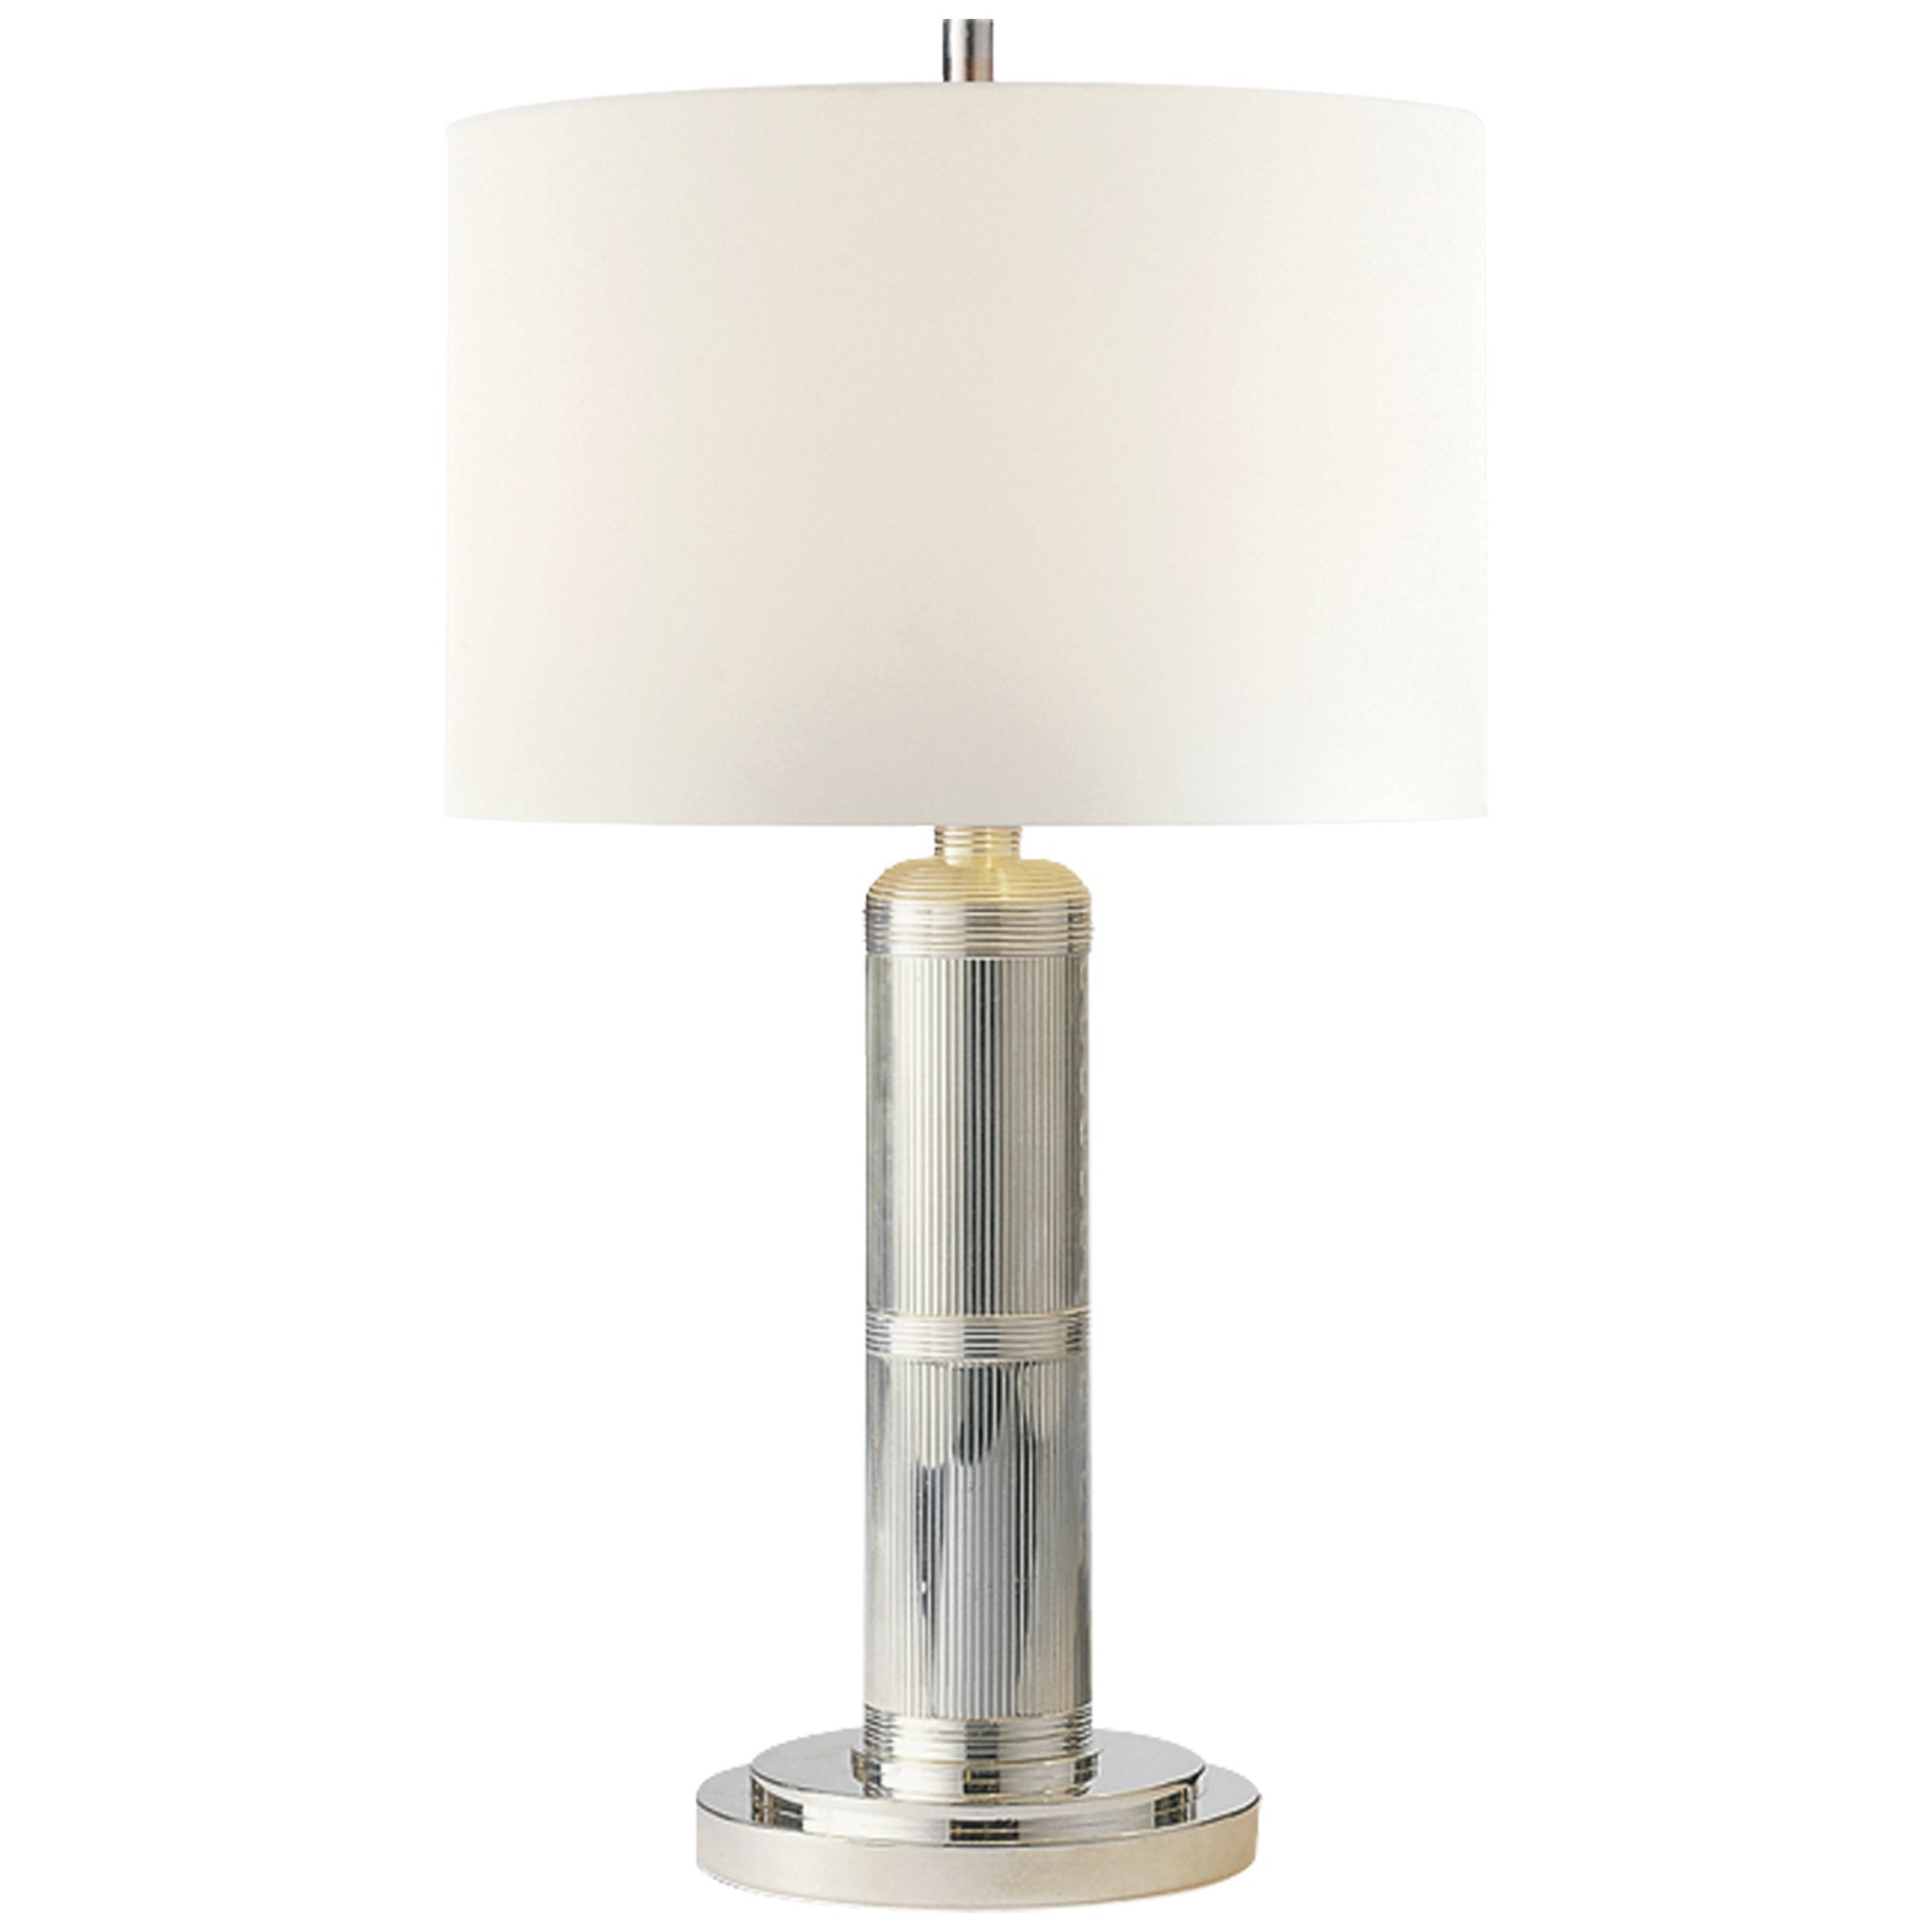 Thomas O'Brien Longacre Small Table Lamp in Polished Nickel with Linen Shade